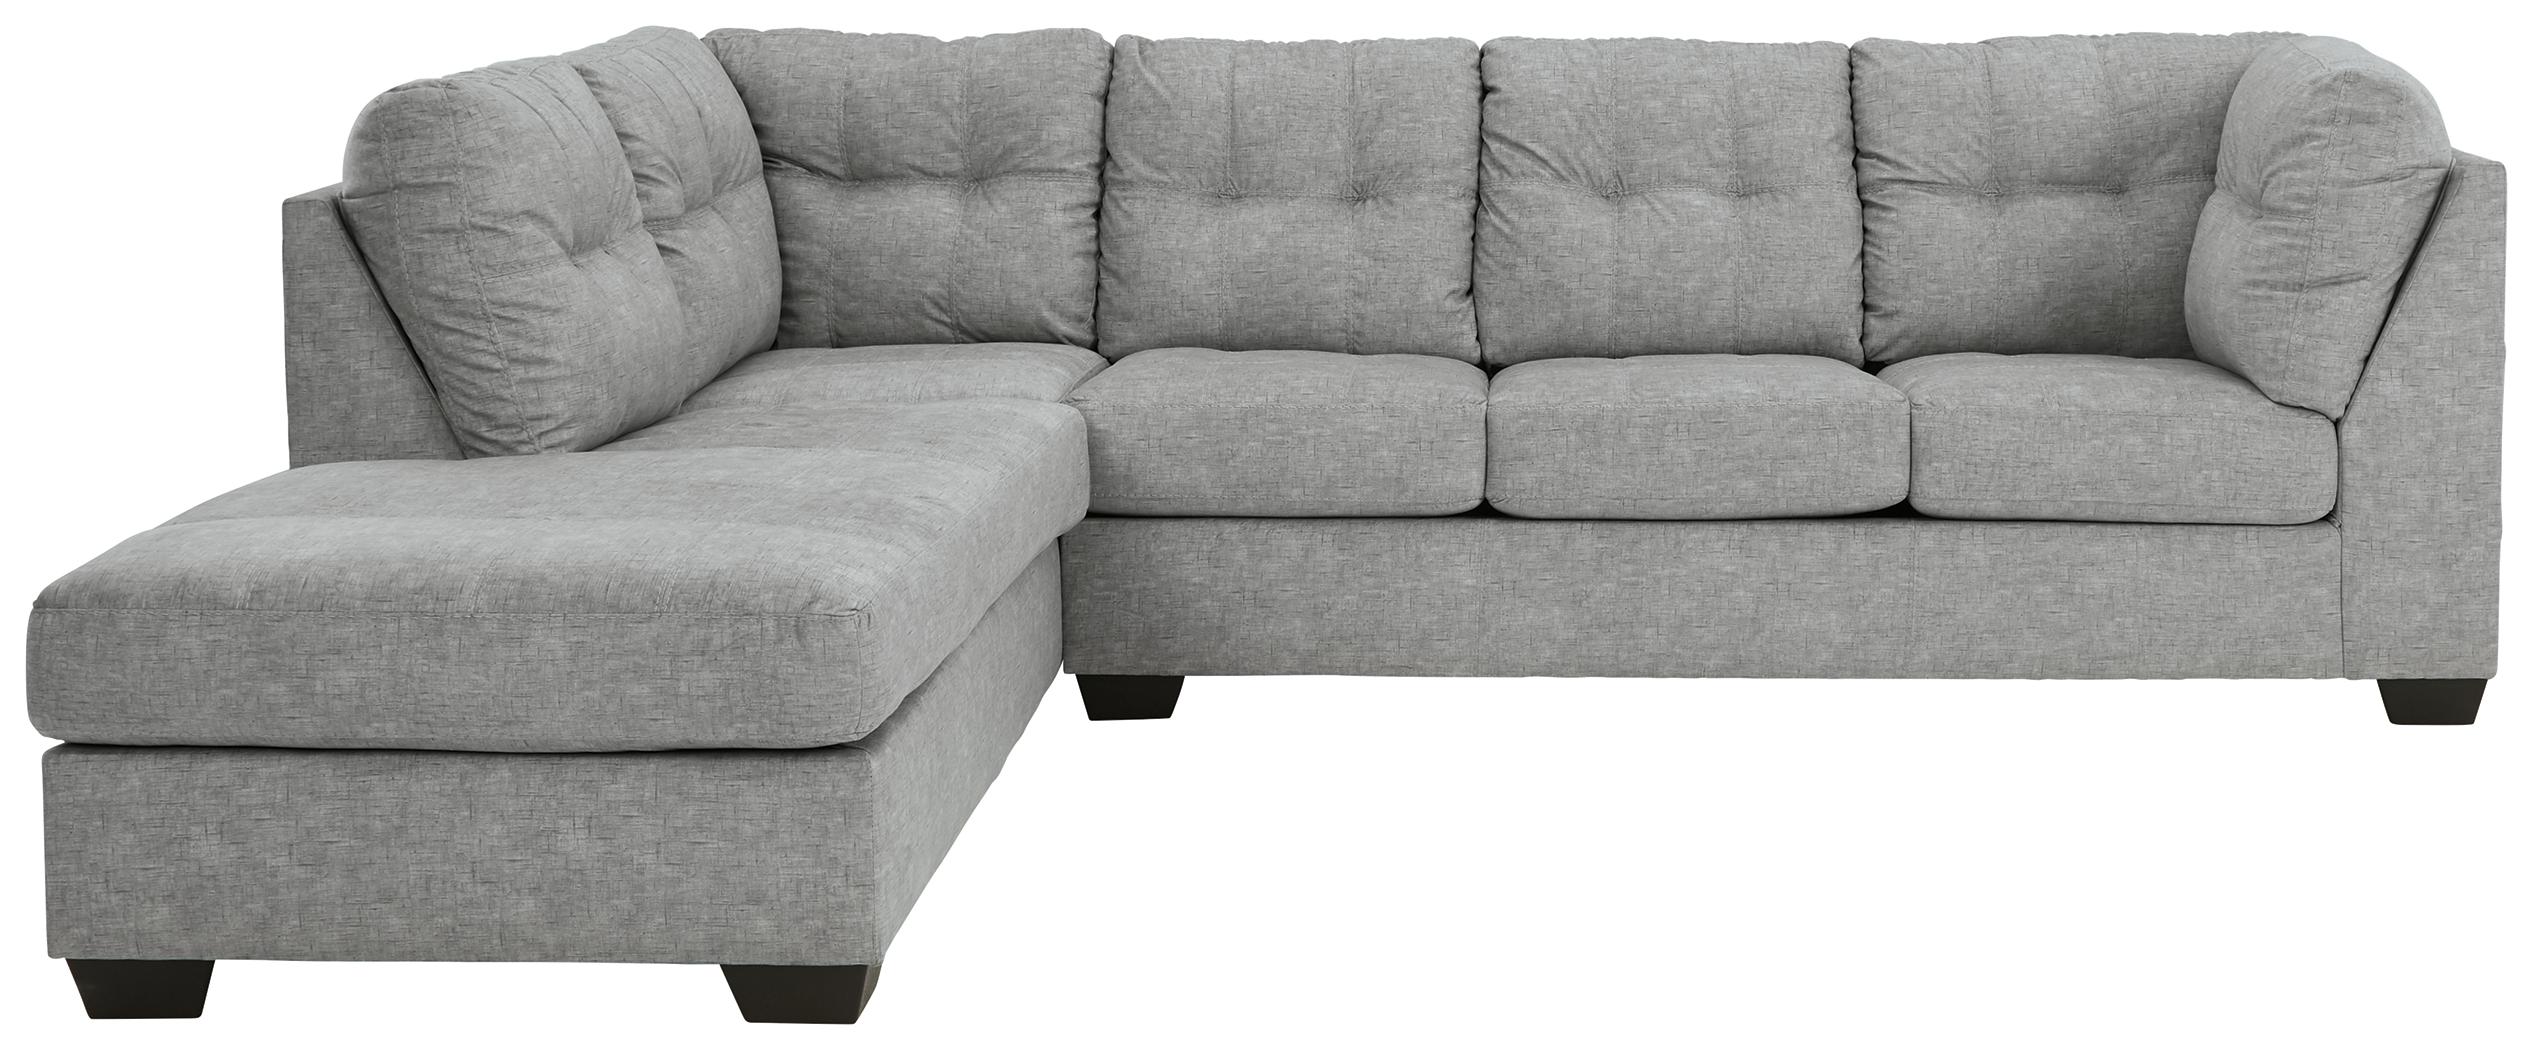 ASHLEY FURNITURE 80804S1 Falkirk 2-piece Sectional With Chaise